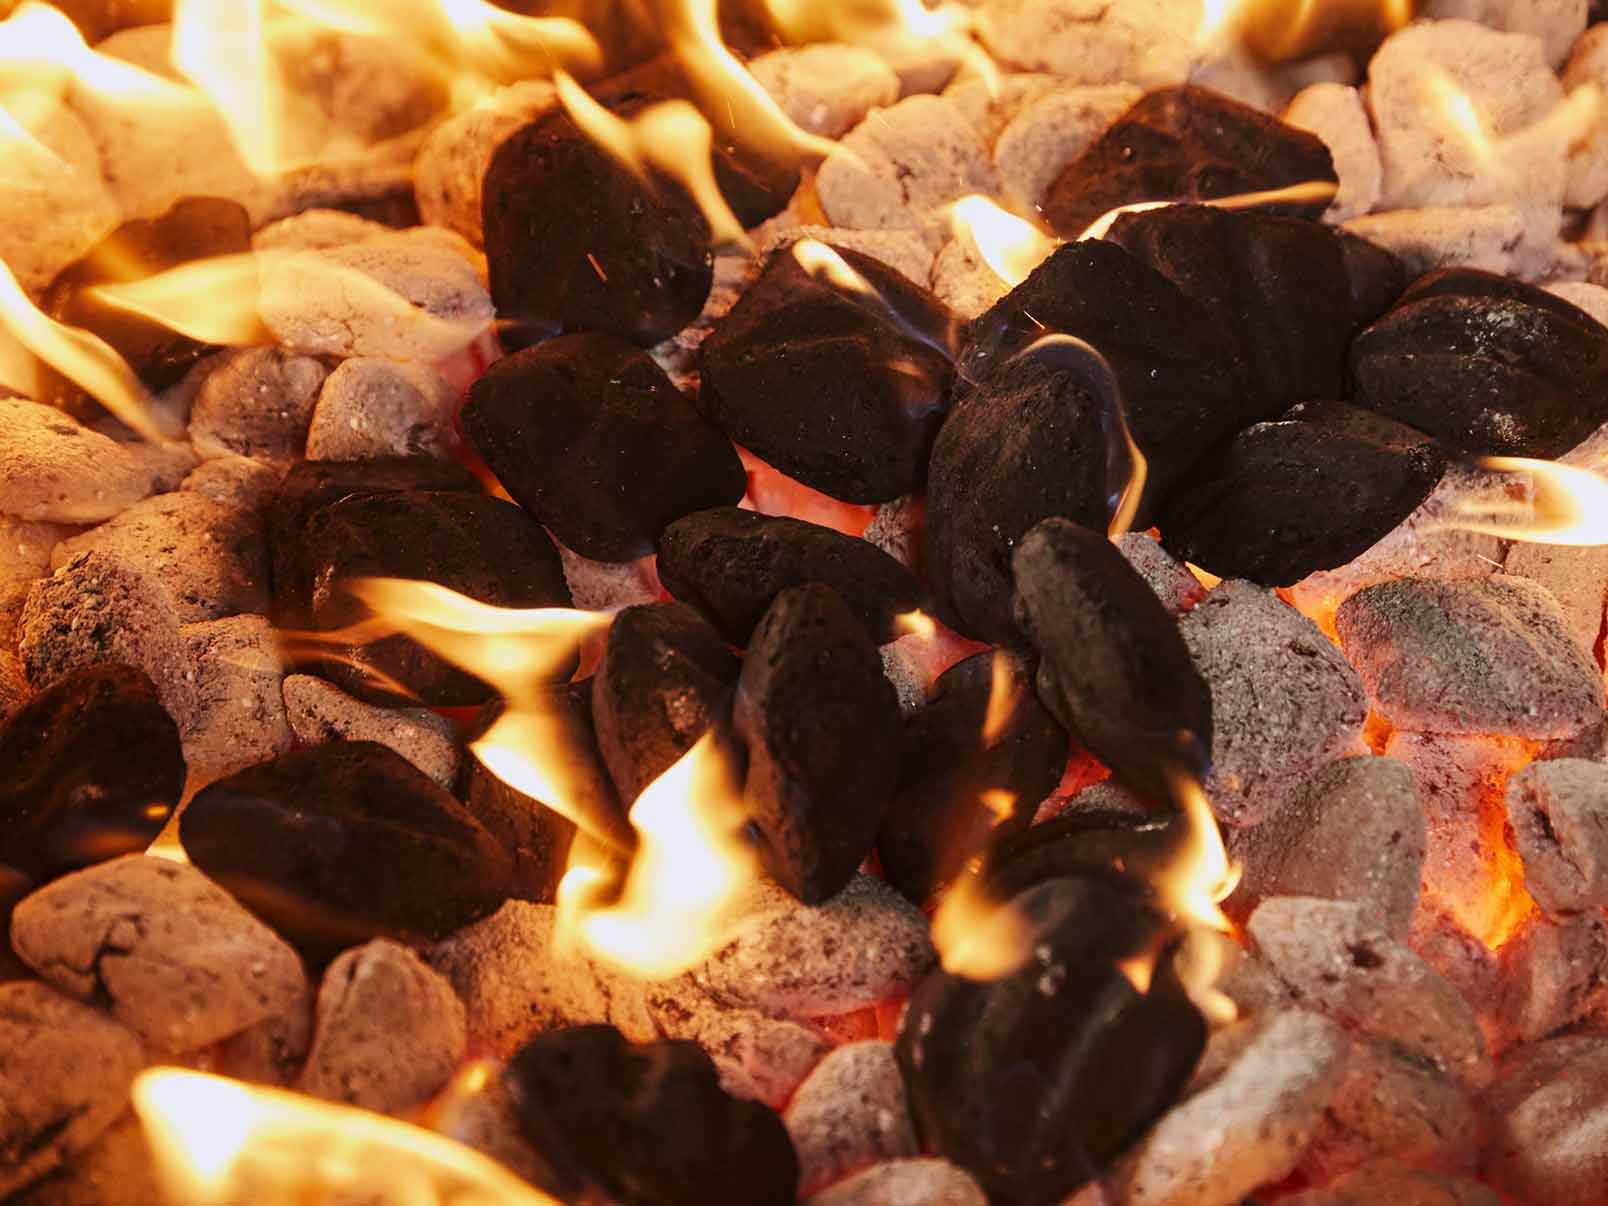 How to Control the Heat When Grilling With Charcoal